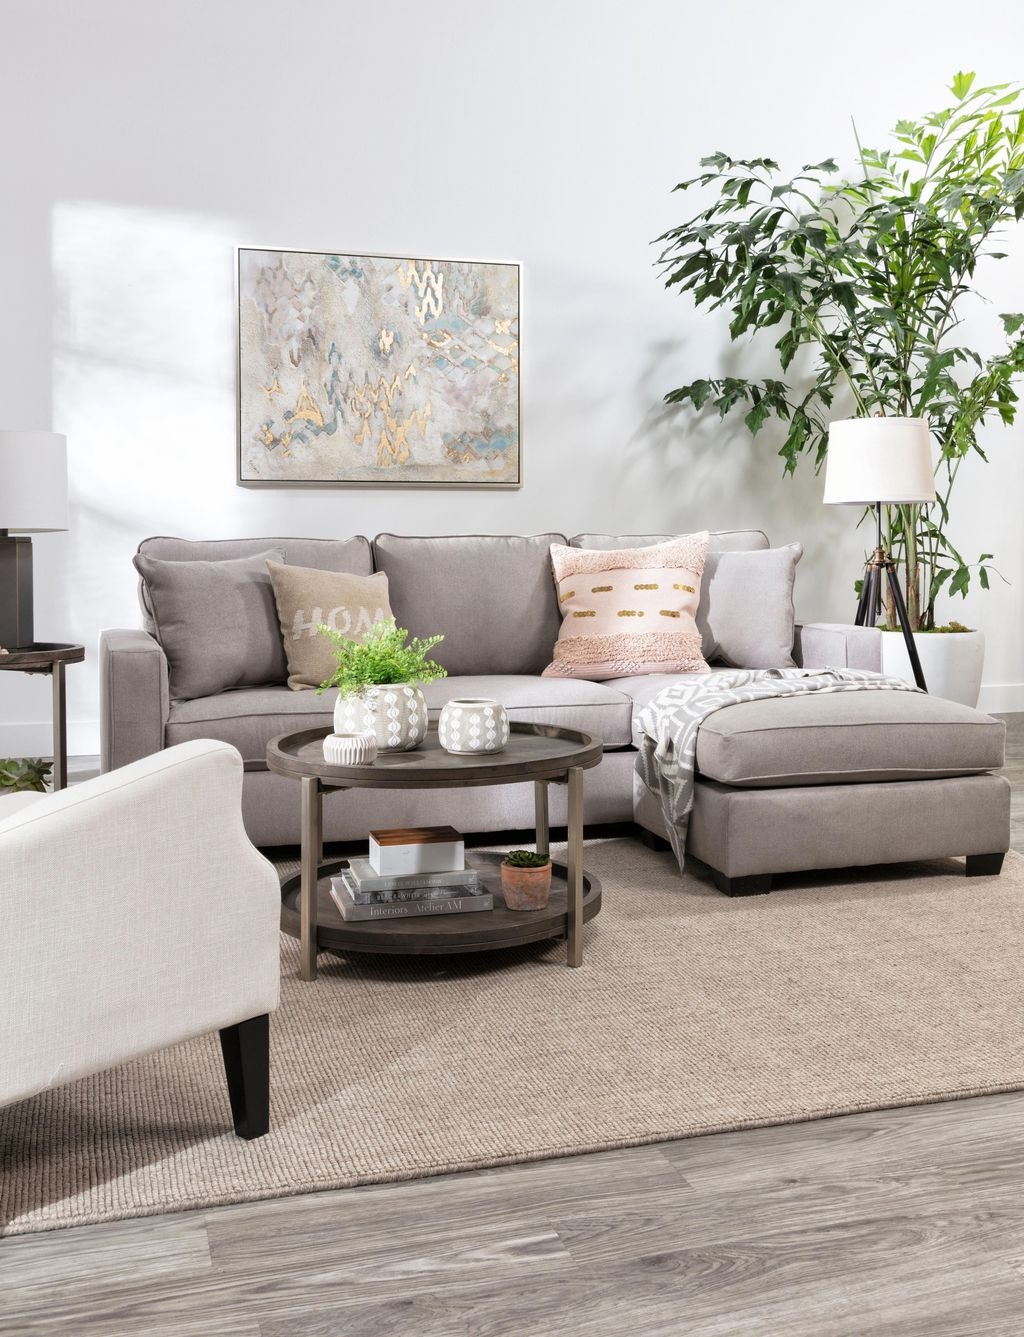 Modern And Minimalist Sofa For Your Living Room08